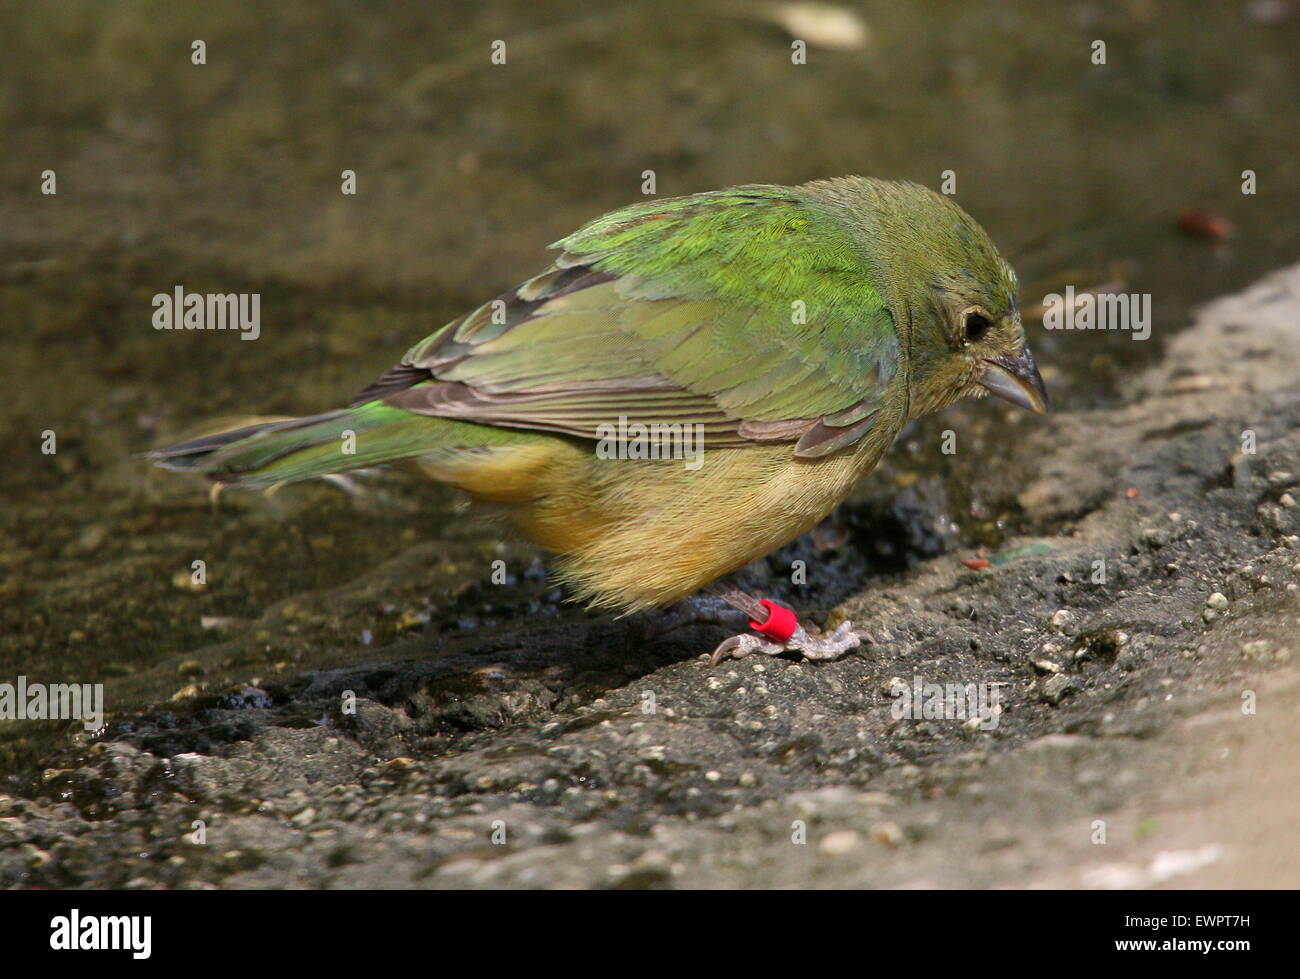 Female Painted bunting (Passerina ciris), native to the deserts of Mexico and the Southern USA Stock Photo